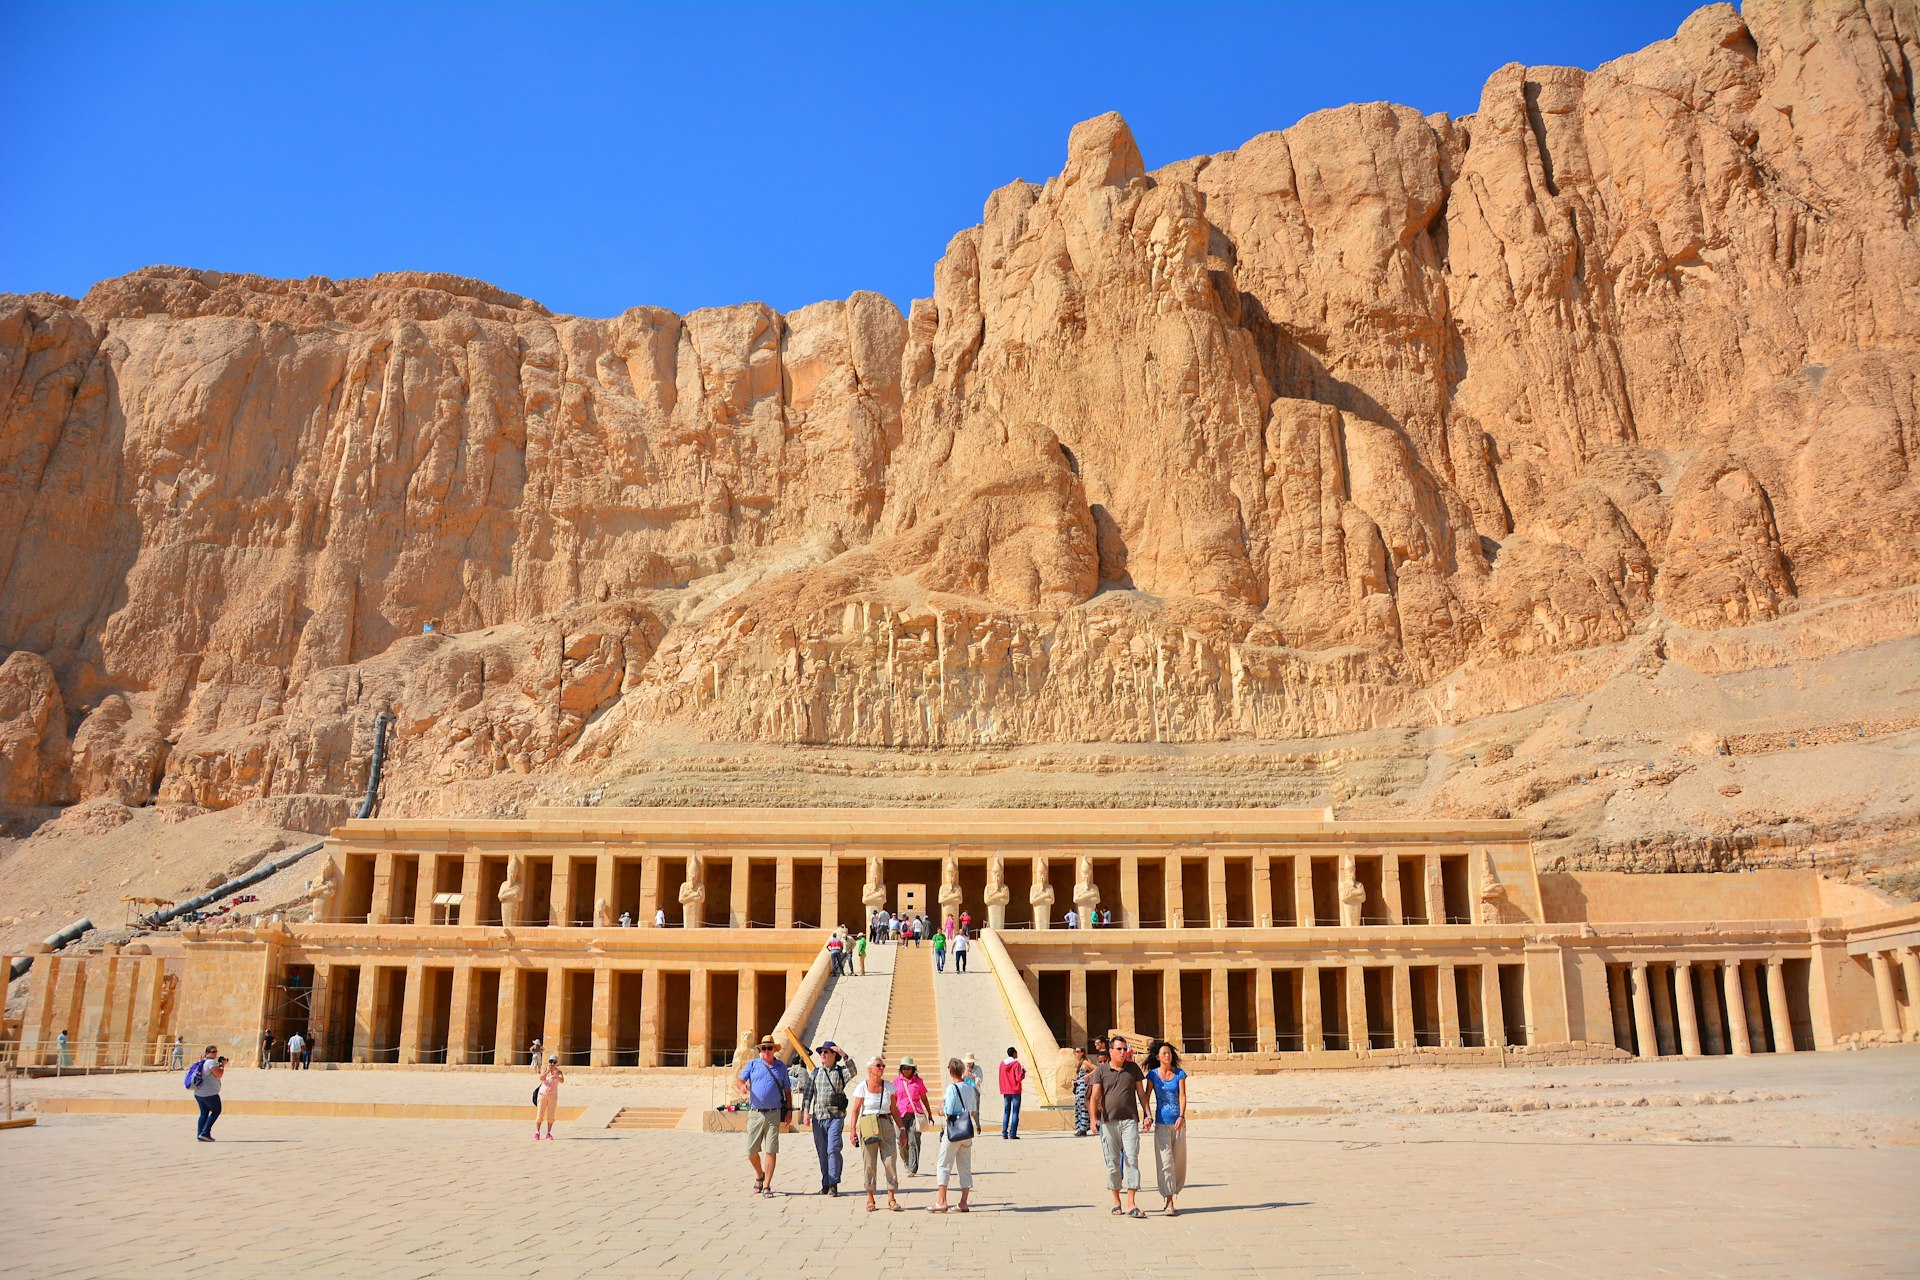 Visitors admire the facade of the Temple of Hatshepsut in Luxor, a vast temple built into the base of a rocky cliff